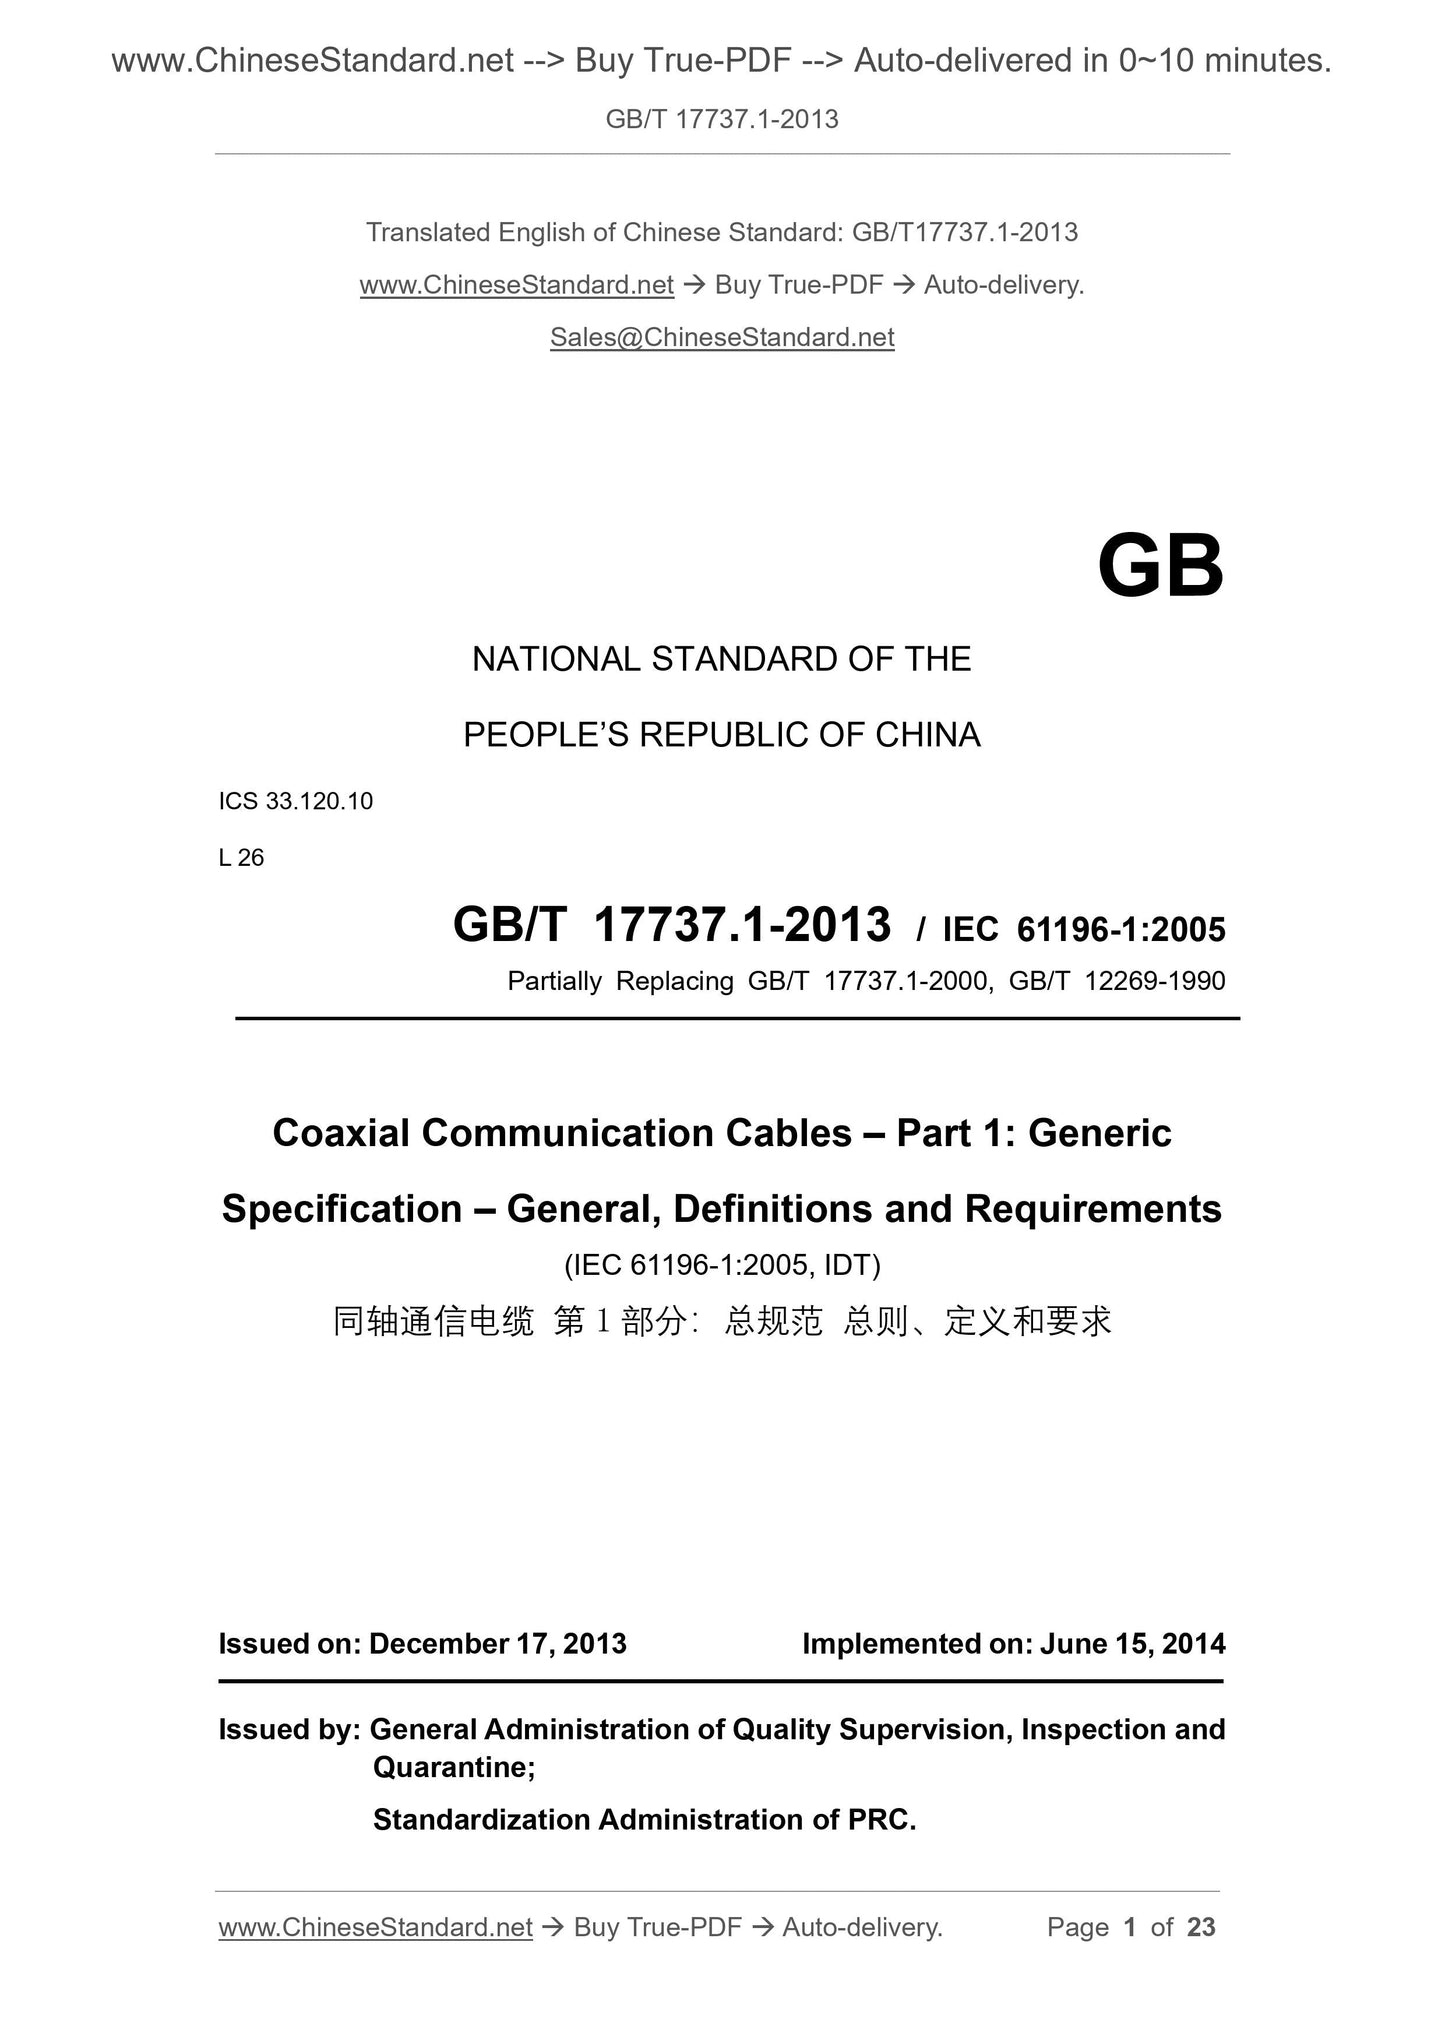 GB/T 17737.1-2013 Page 1